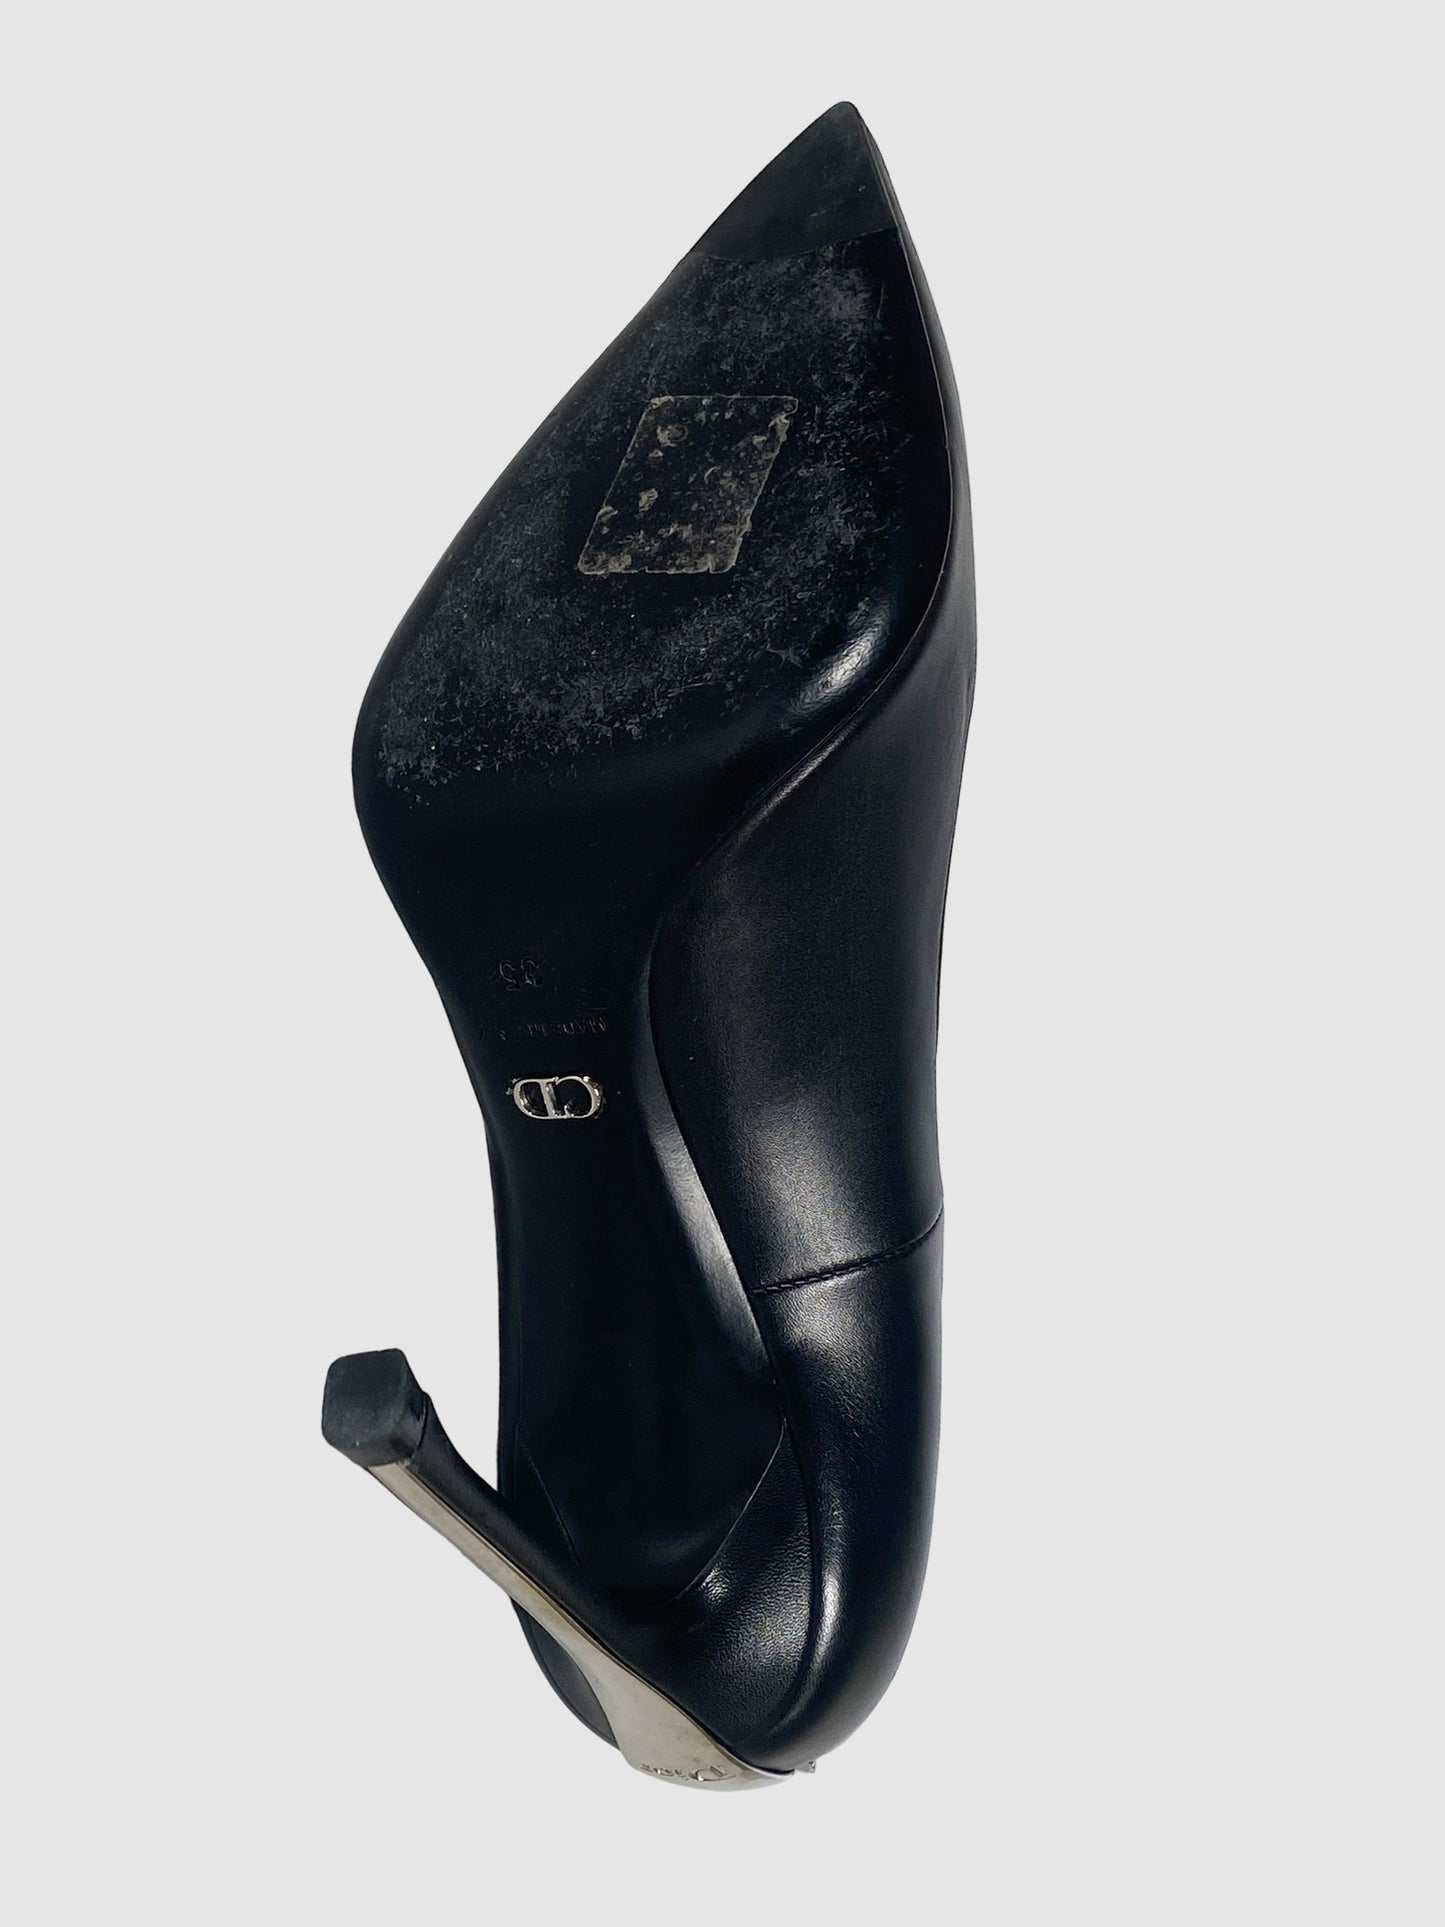 Christian Dior 'Star' Leather Pumps - Size 35